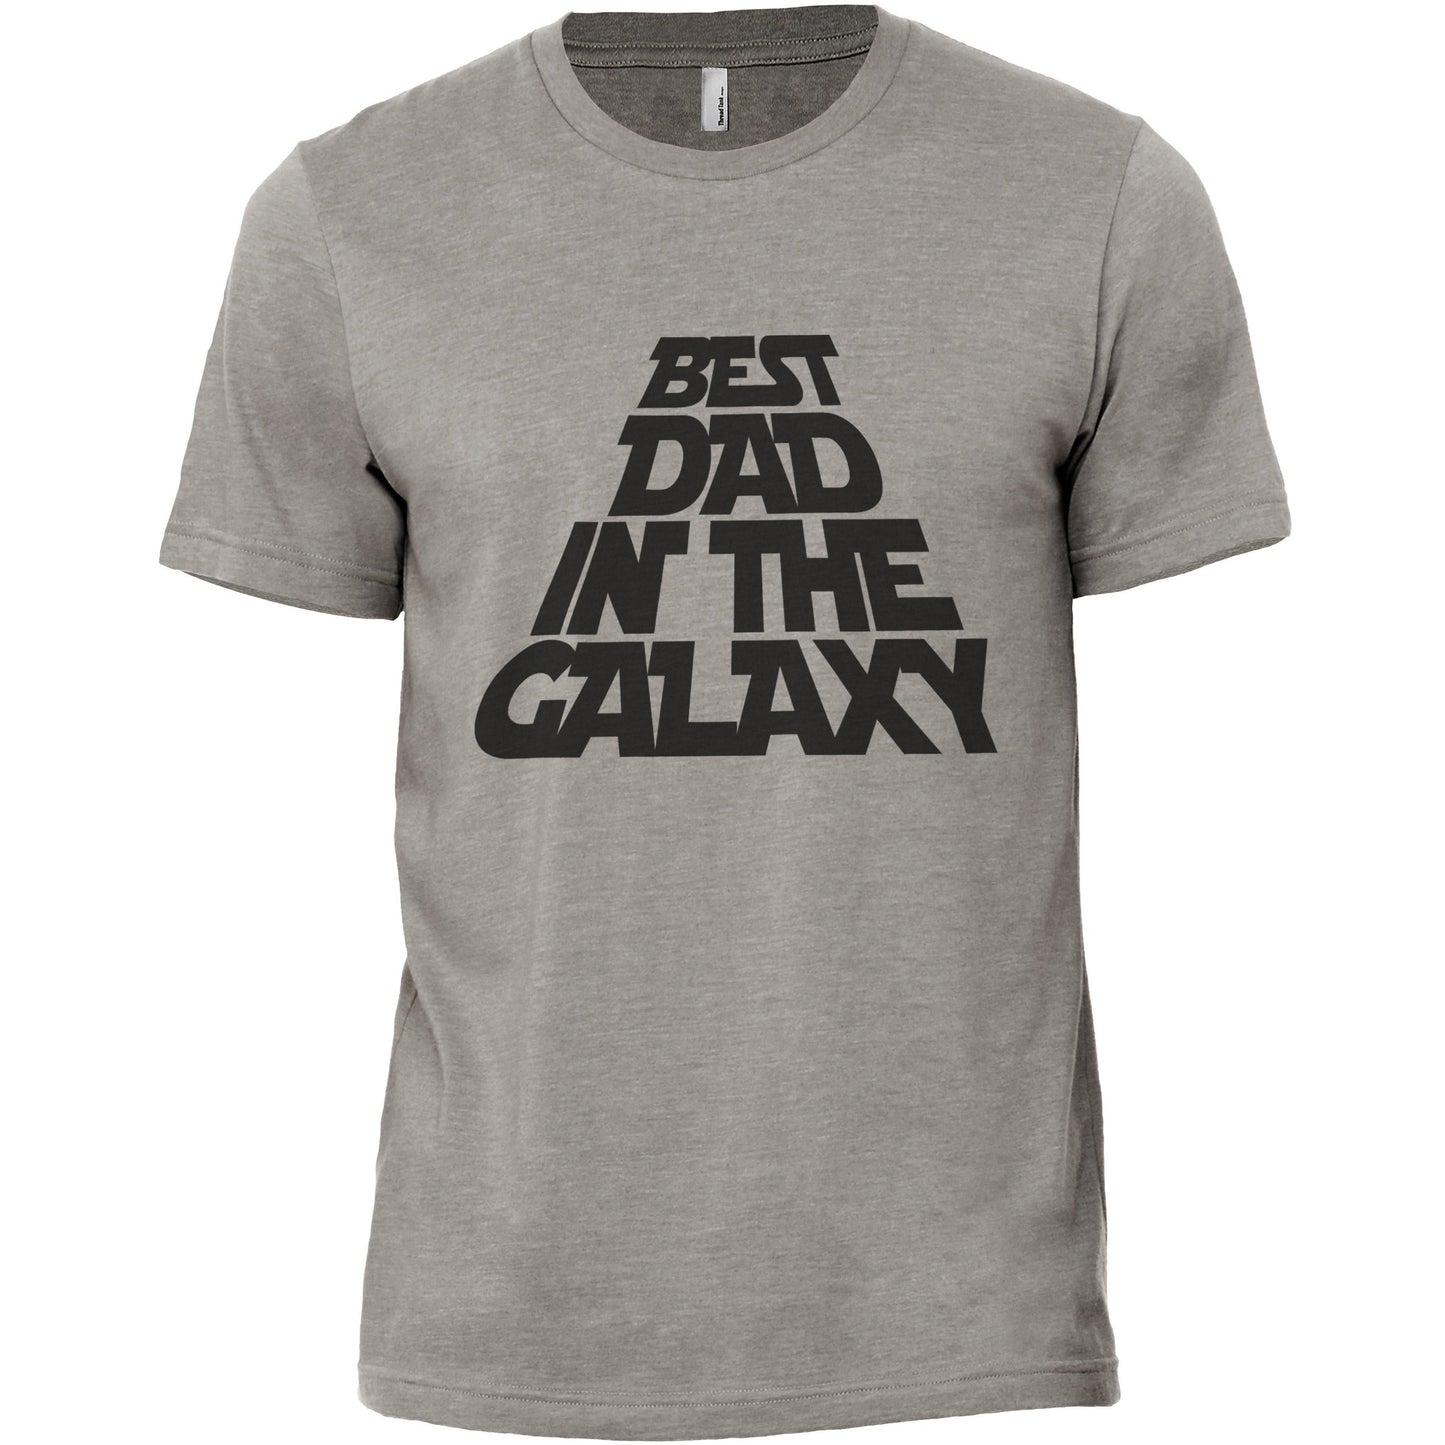 The Best Dad in the Galaxy - Stories You Can Wear